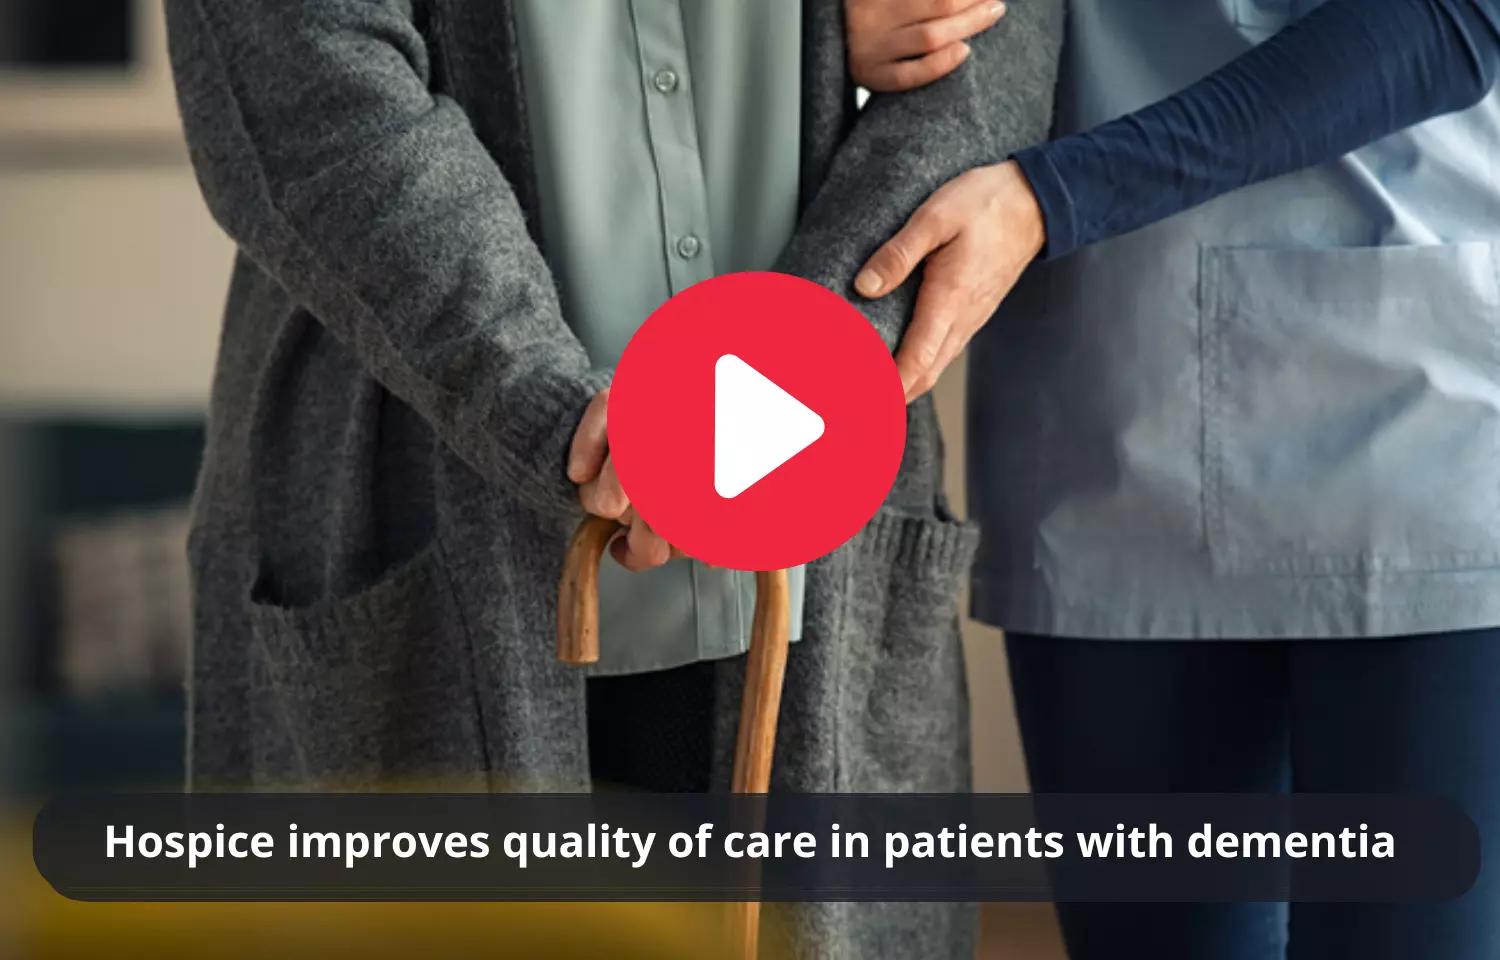 Hospice improves quality of care in patients with dementia